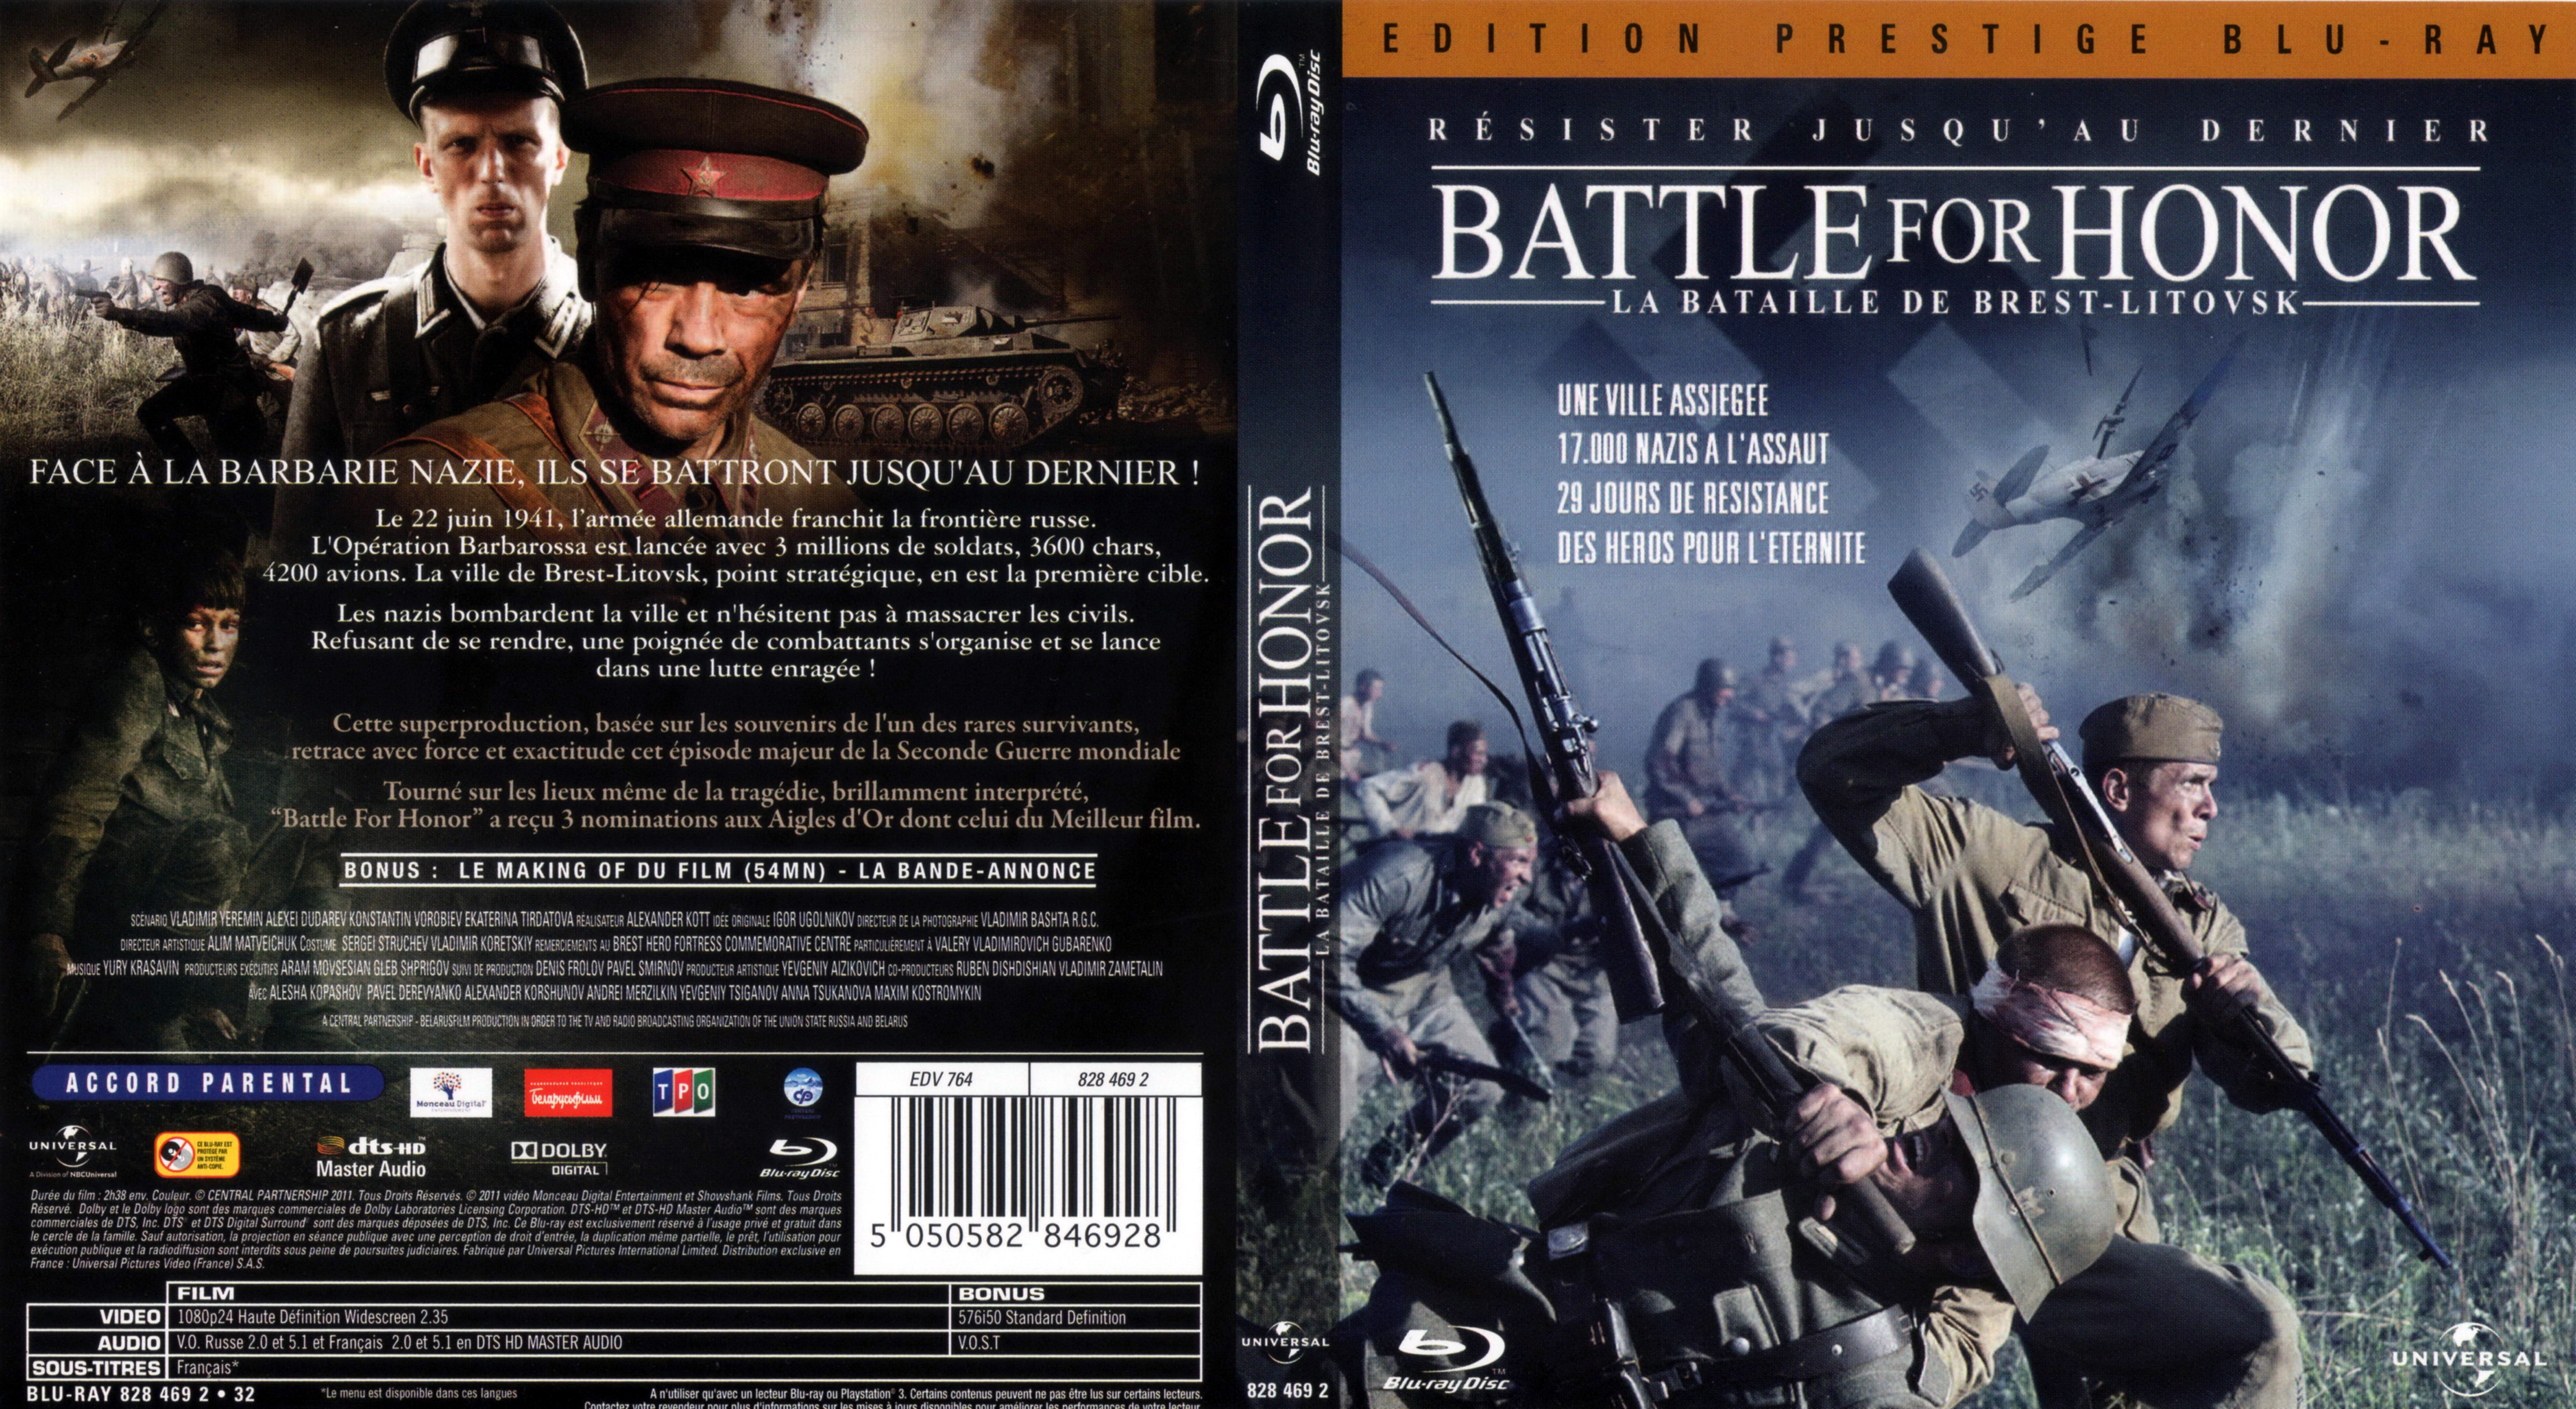 Jaquette DVD Battle for honor (BLU-RAY)